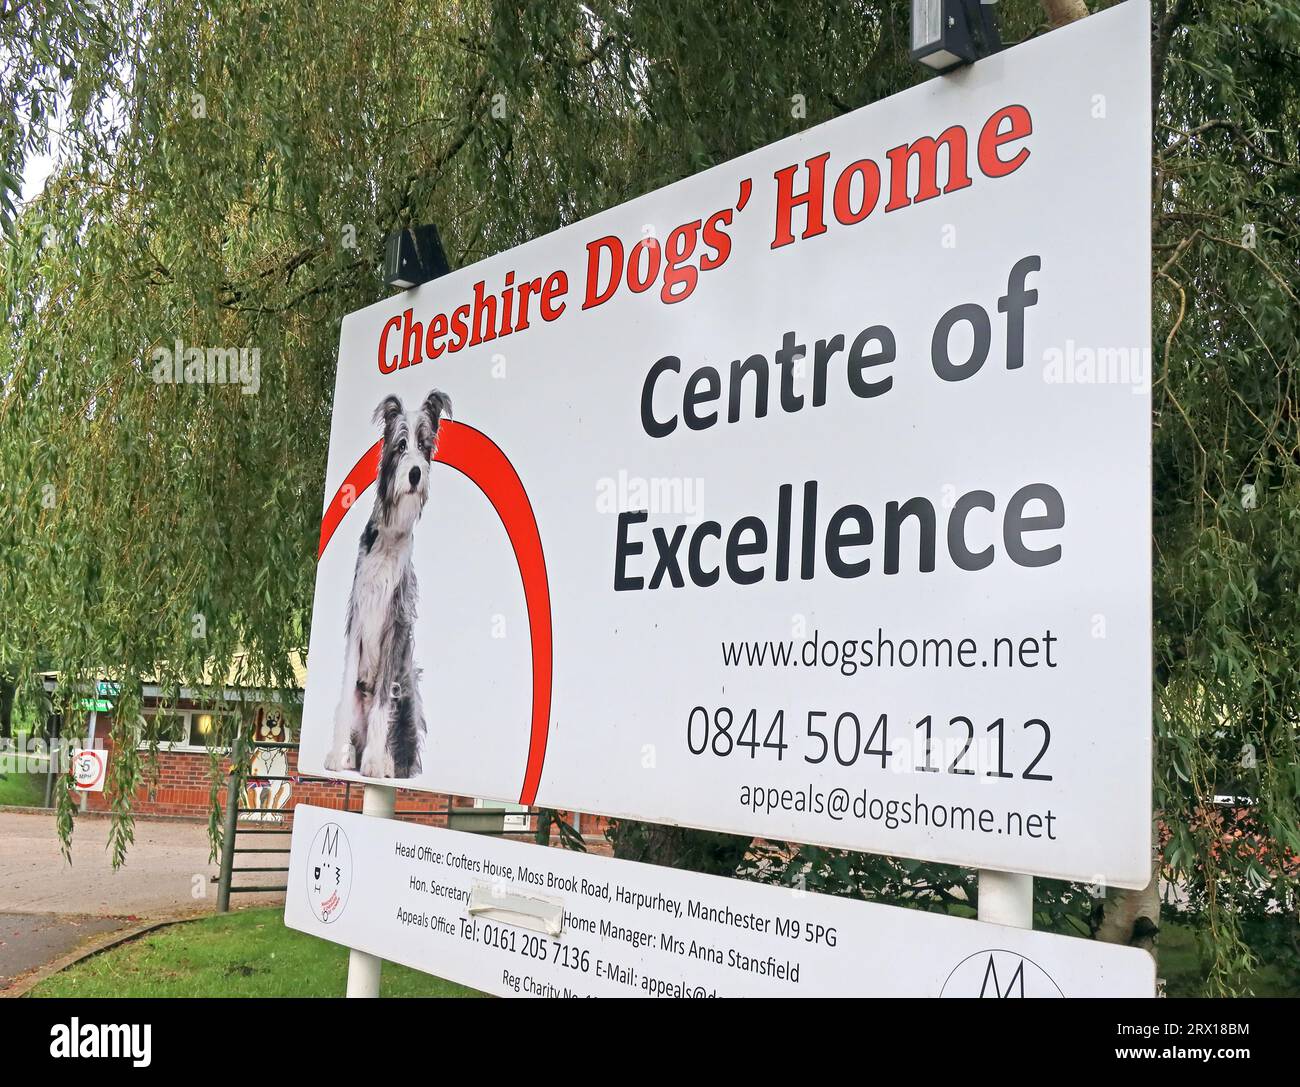 Cheshire Dogs Home, centre of excellence, Grappenhall, 225 Knutsford Rd, Thelwall, Warrington, Cheshire, England, UK,  WA4 3JZ Stock Photo